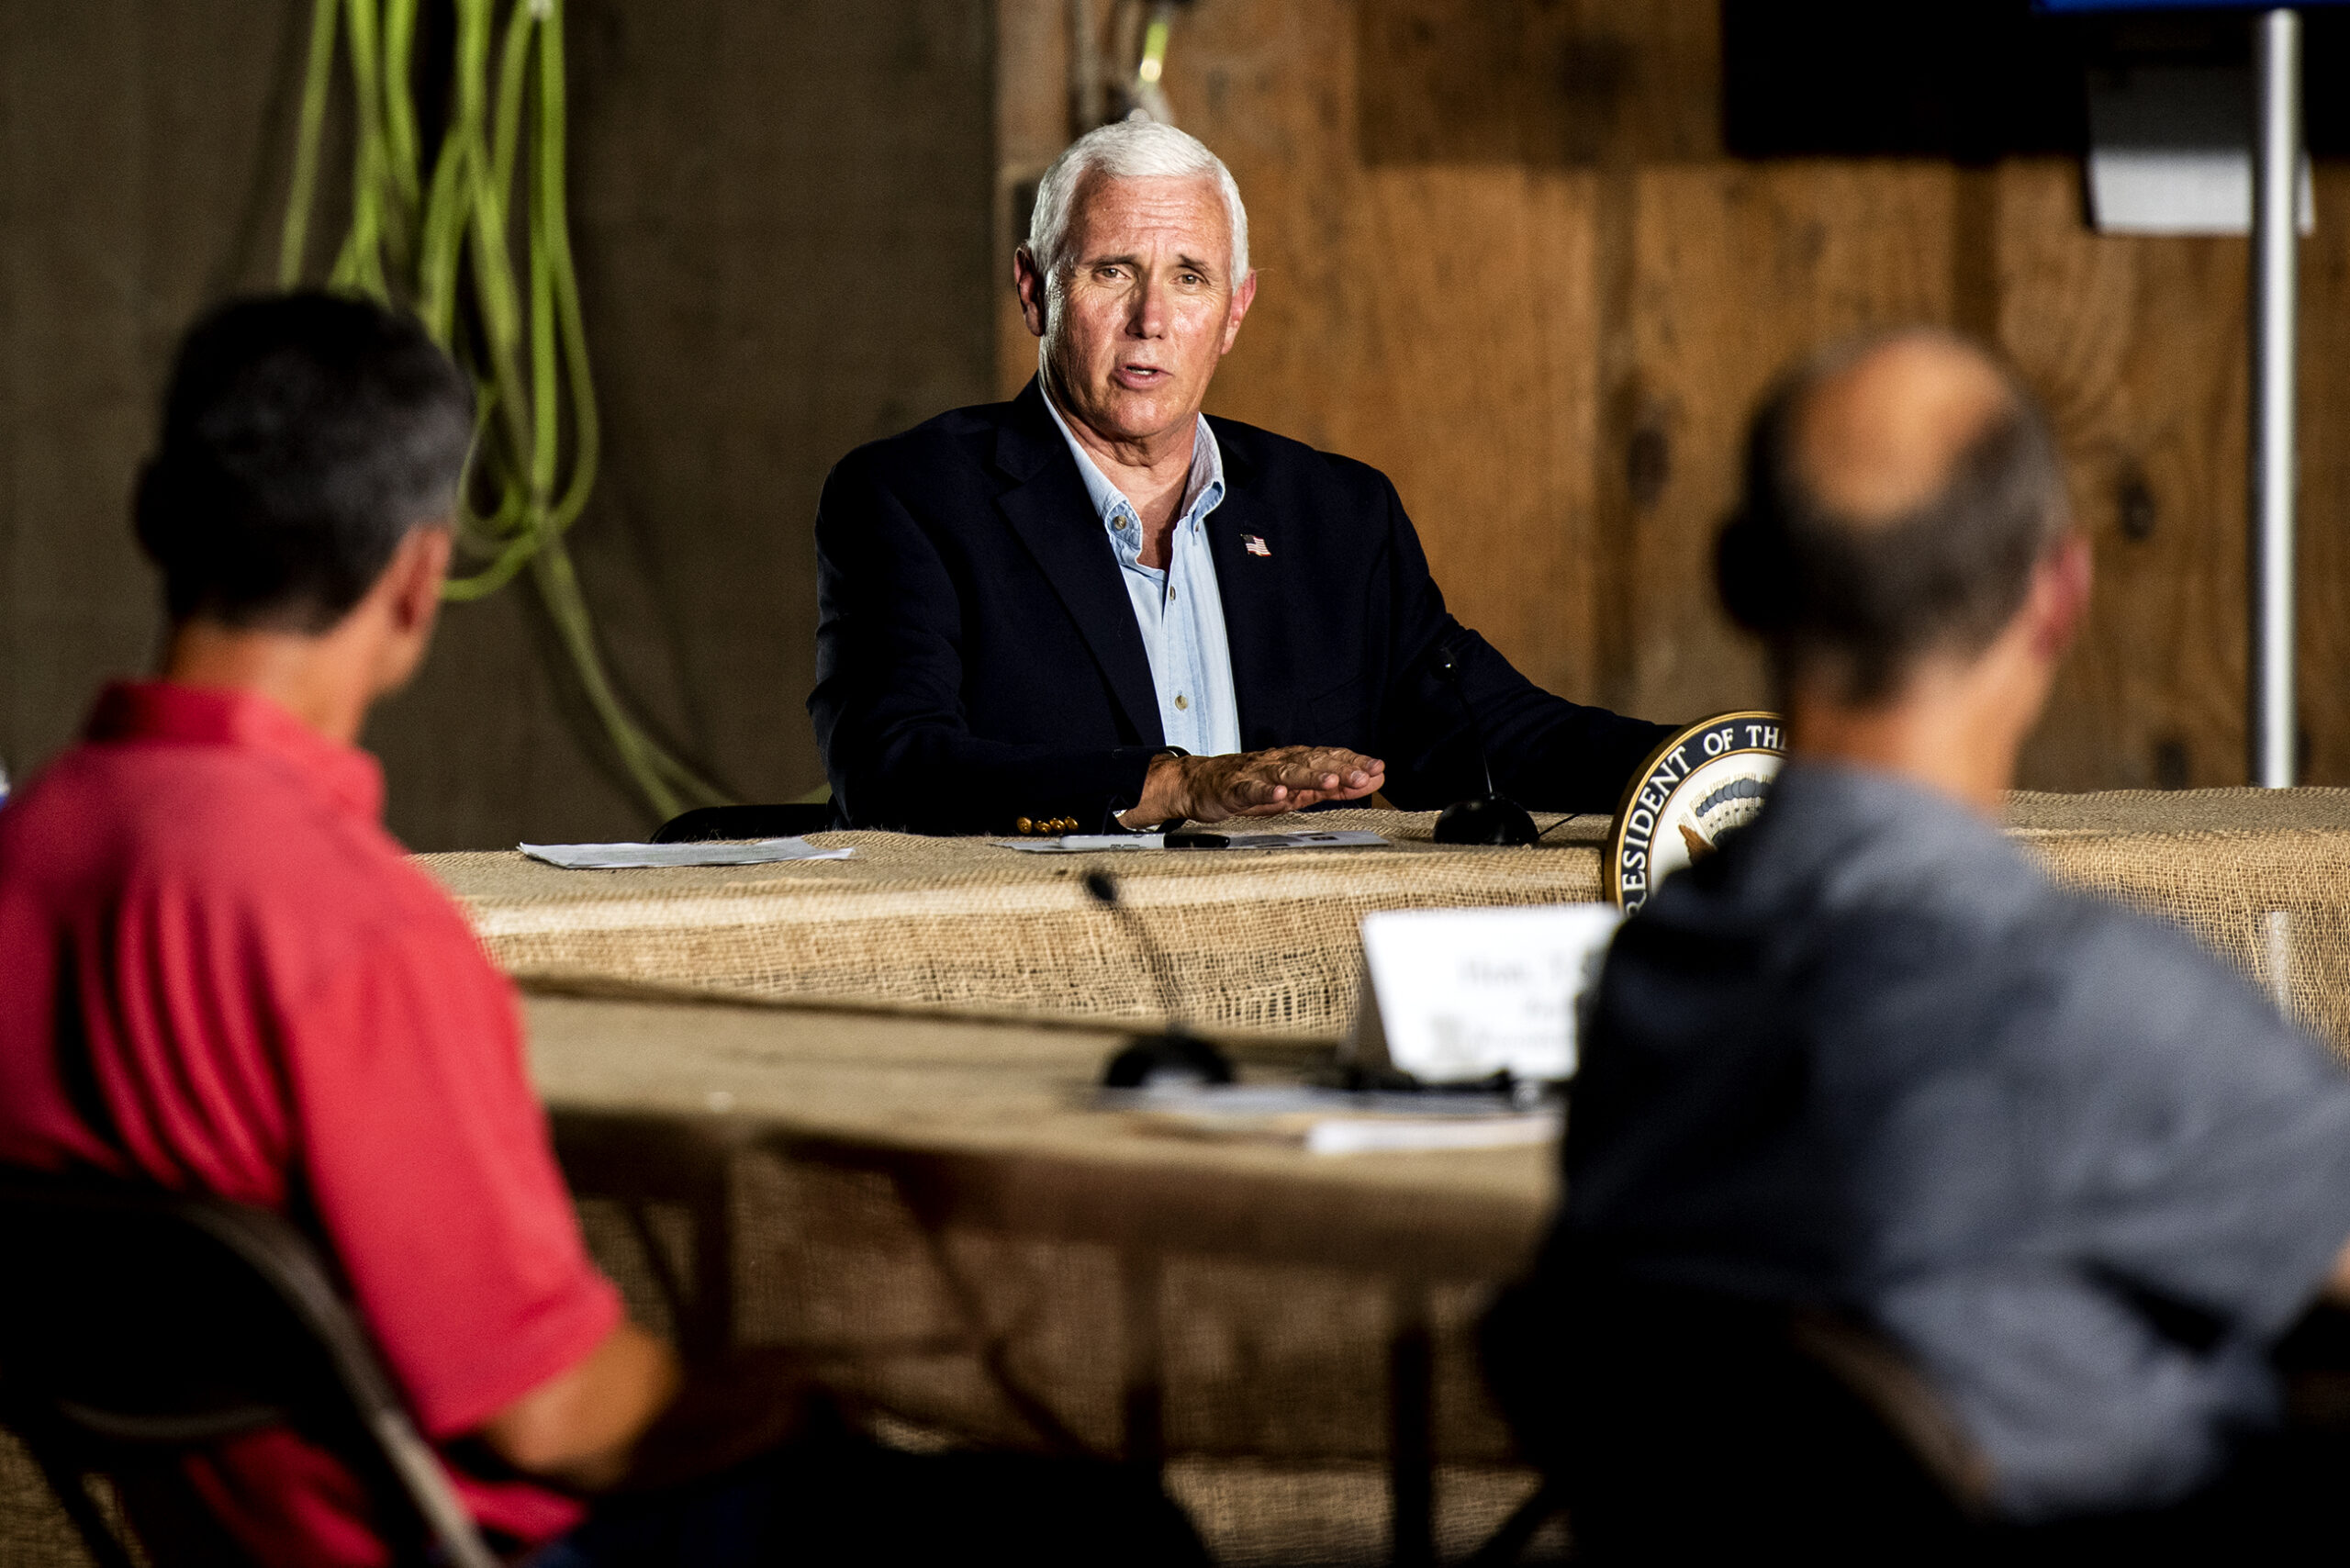 Vice President Mike Pence looks toward people at a round table